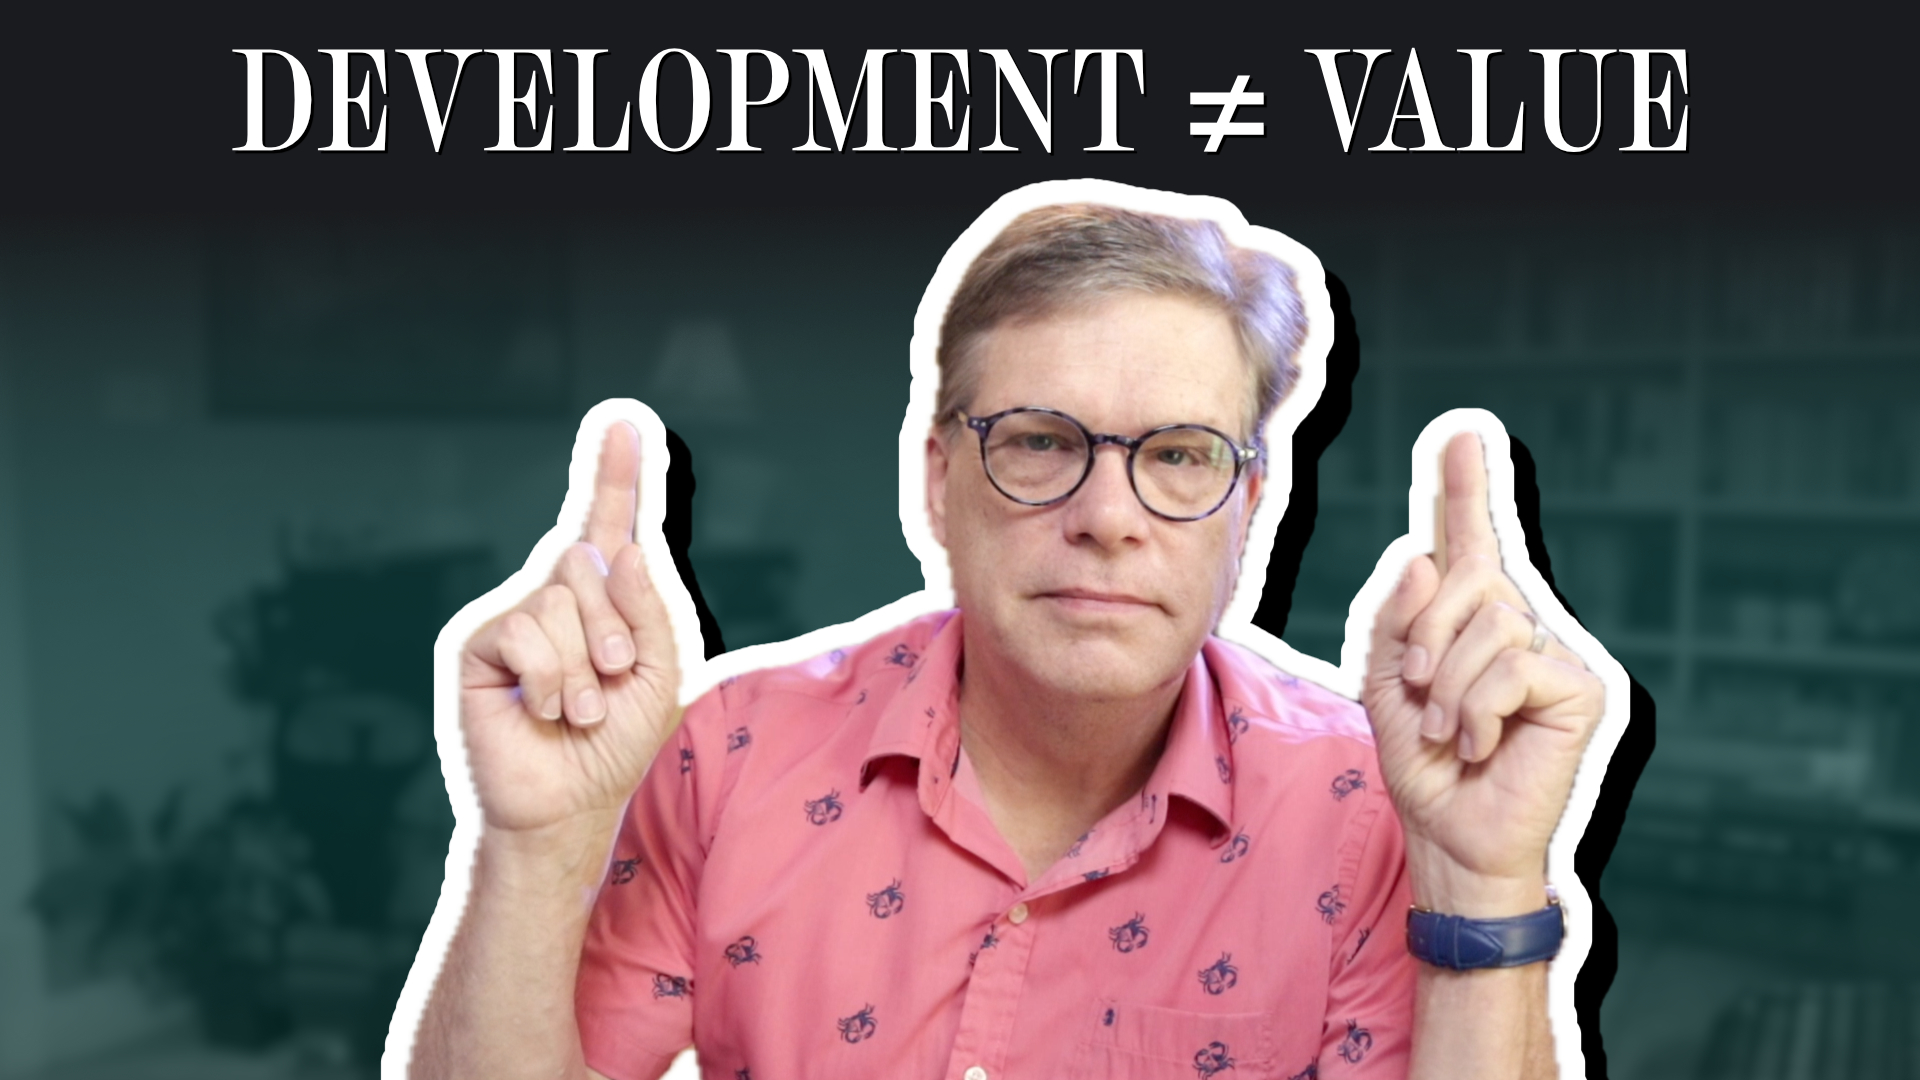 Level of development does not equal level of value